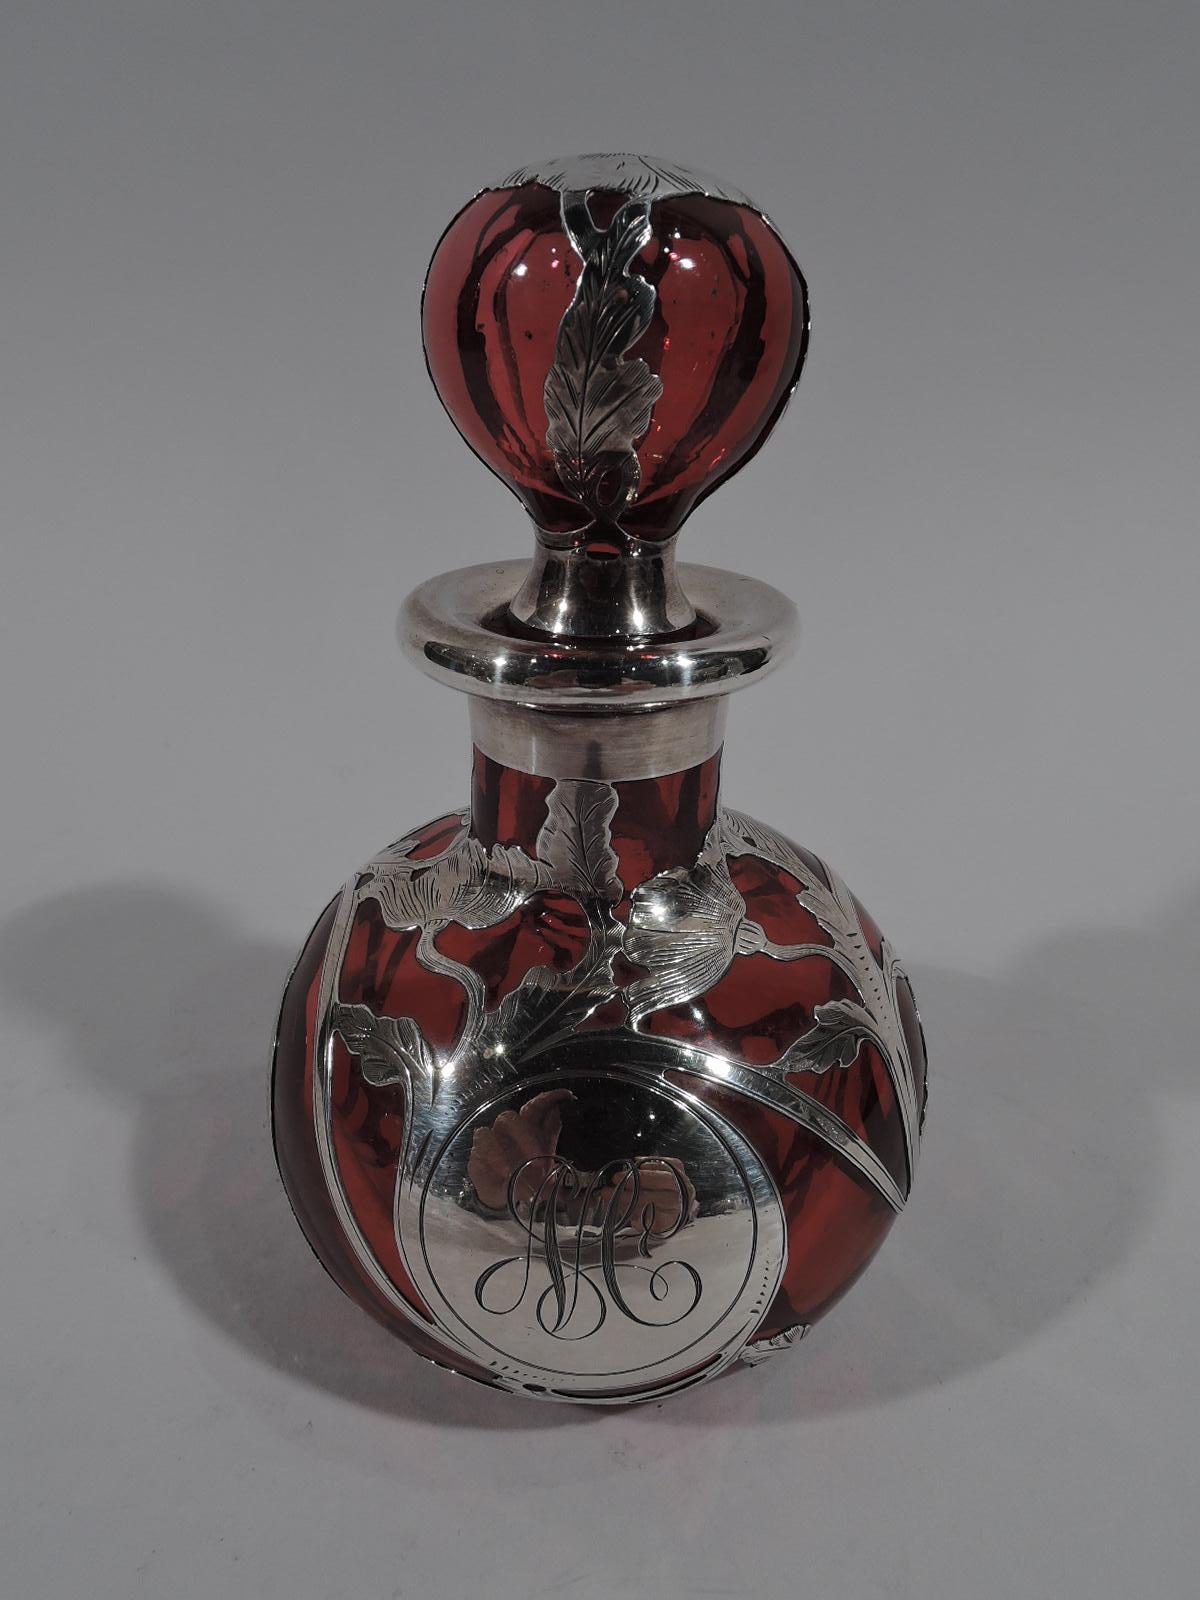 Beautiful turn-of-the-century red glass perfume with silver overlay. Made by Gorham in Providence. Globular bottle with short neck and ball stopper. Classical rinceaux overlay and circular frame engraved with interlaced monogram. Maker’s stamp and